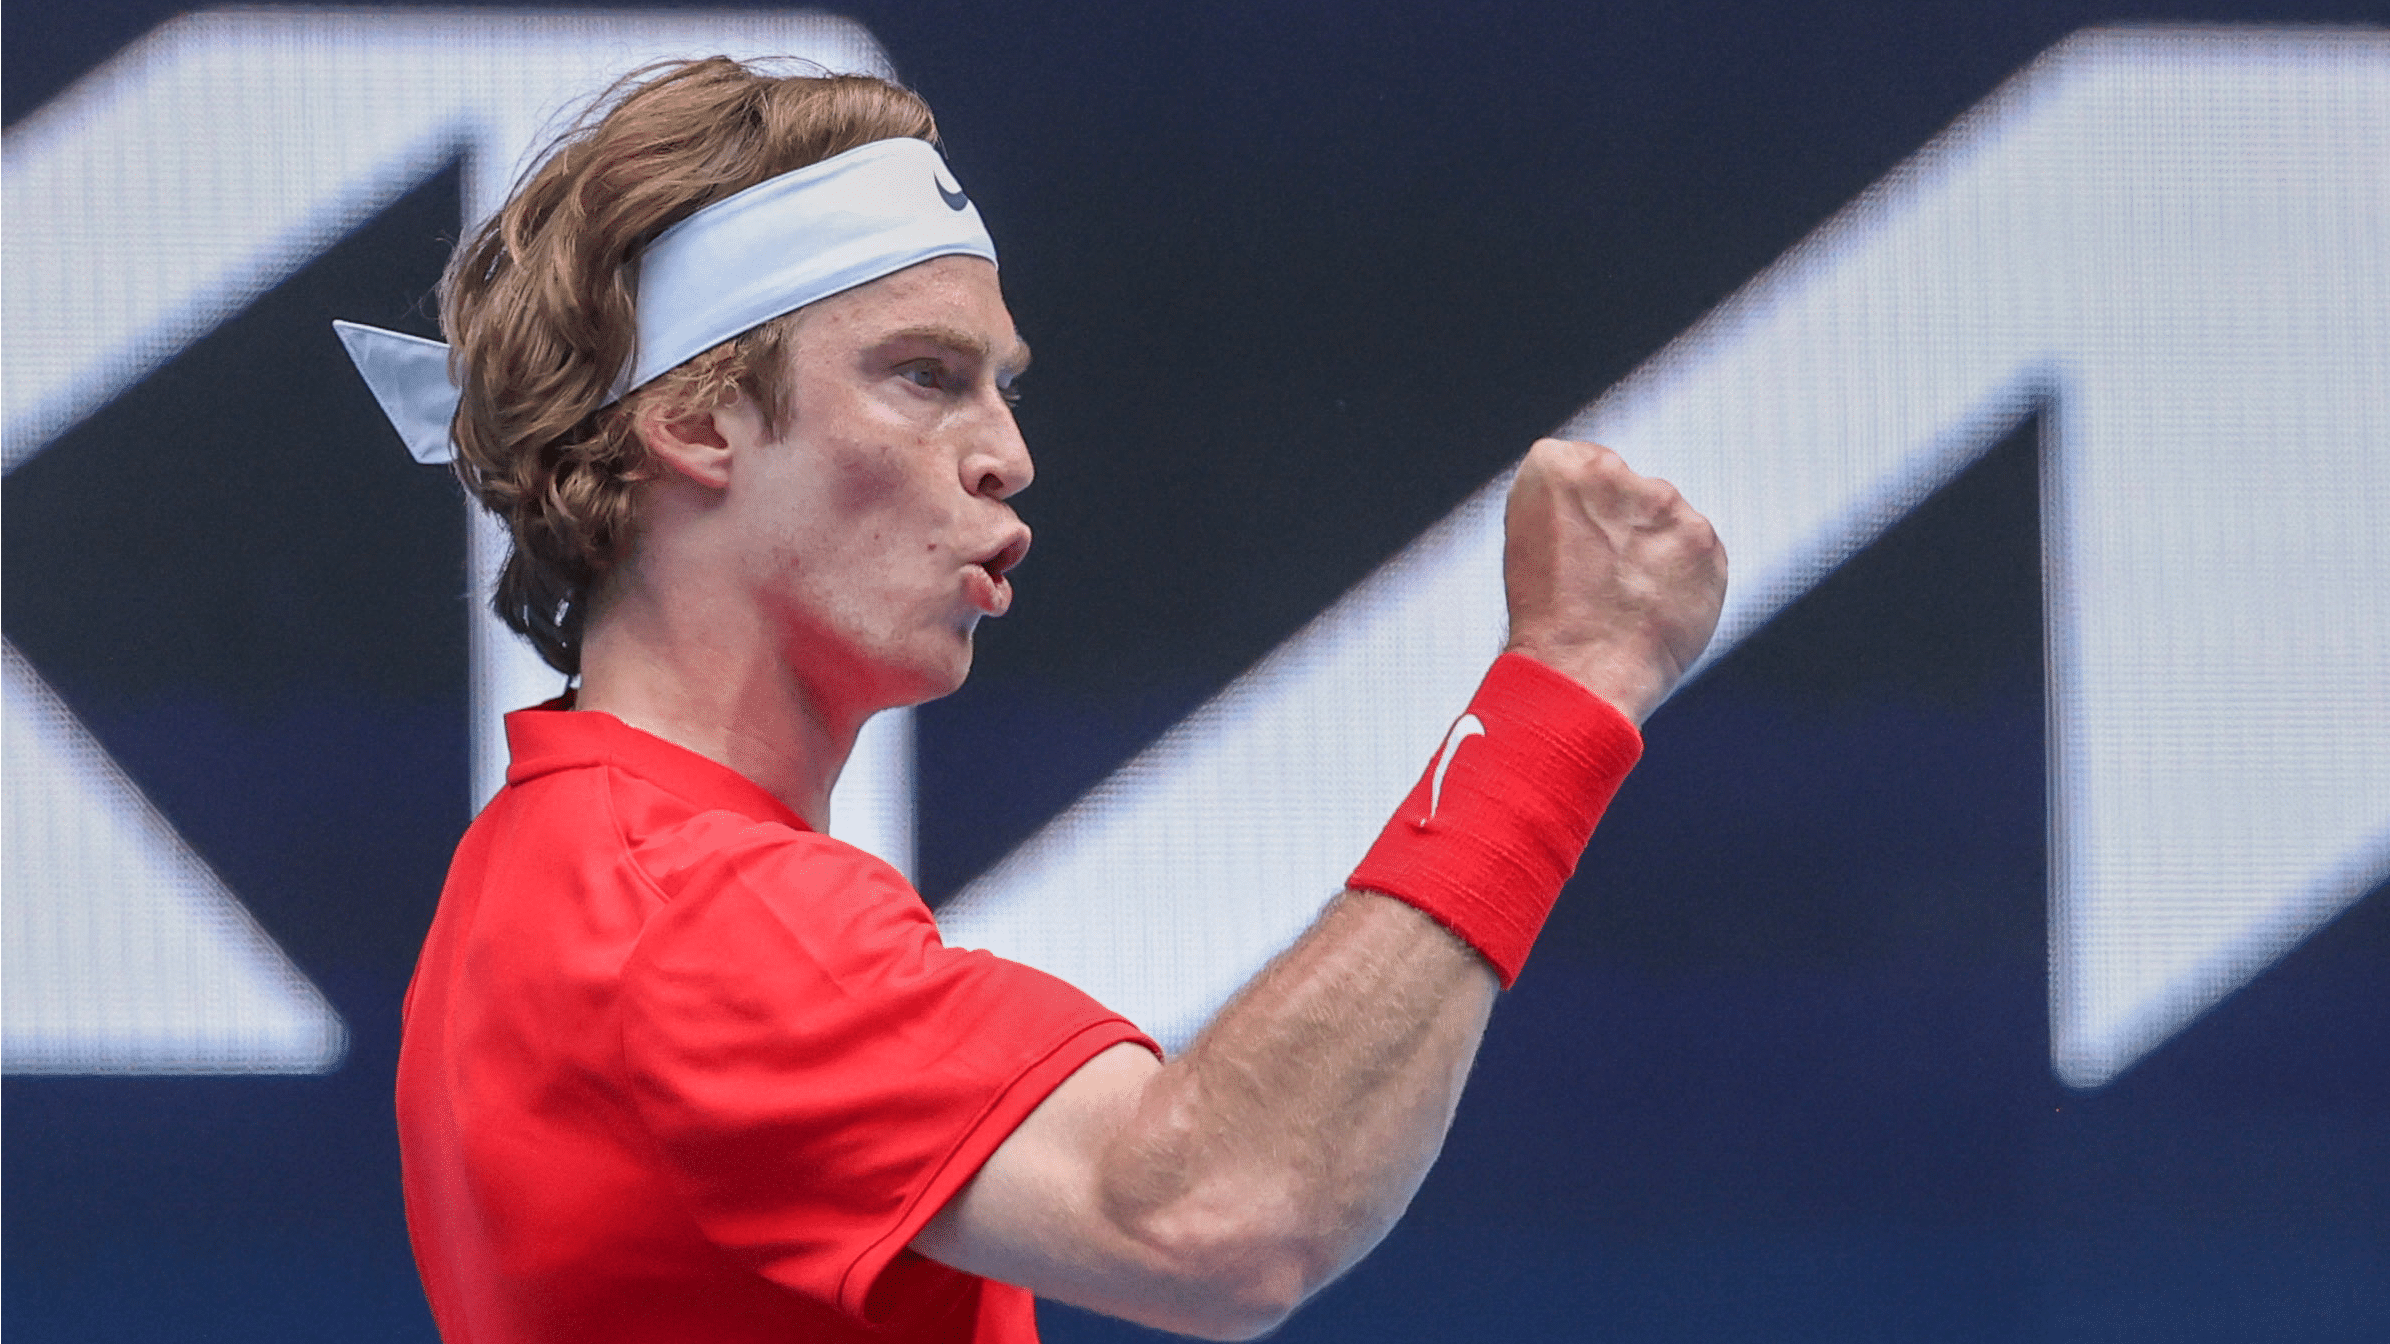 Andrey Rublev beats Andy Murray to win Abu Dhabi Exhibition event